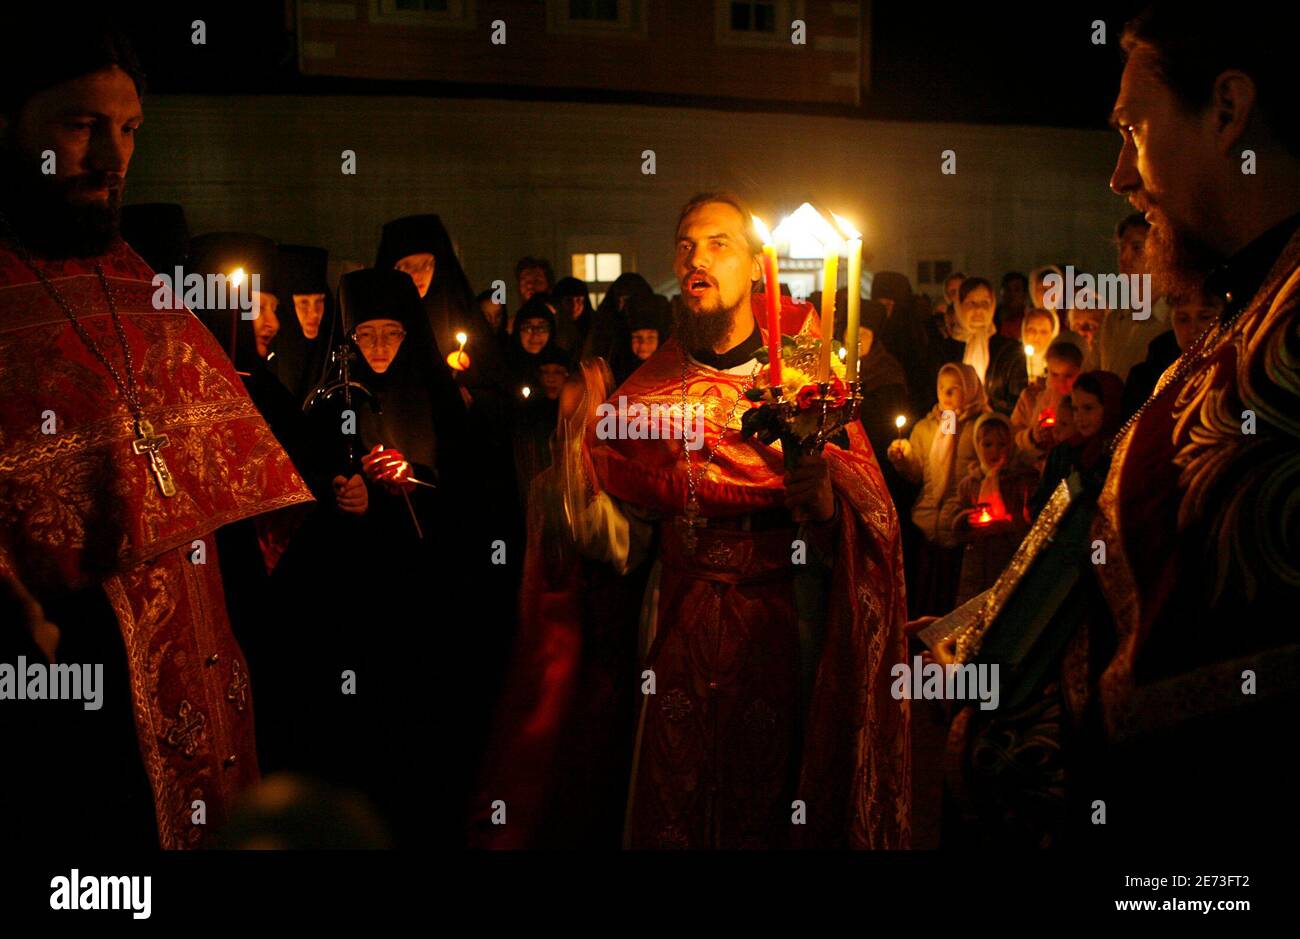 A priest of Saint-Nickolas monastery leads an Orthodox Easter mass in the town of Maloyaroslavets, some 130 km (81 miles) south-west of Moscow early April, 27 2008. REUTERS/Denis Sinyakov   (RUSSIA) Stock Photo